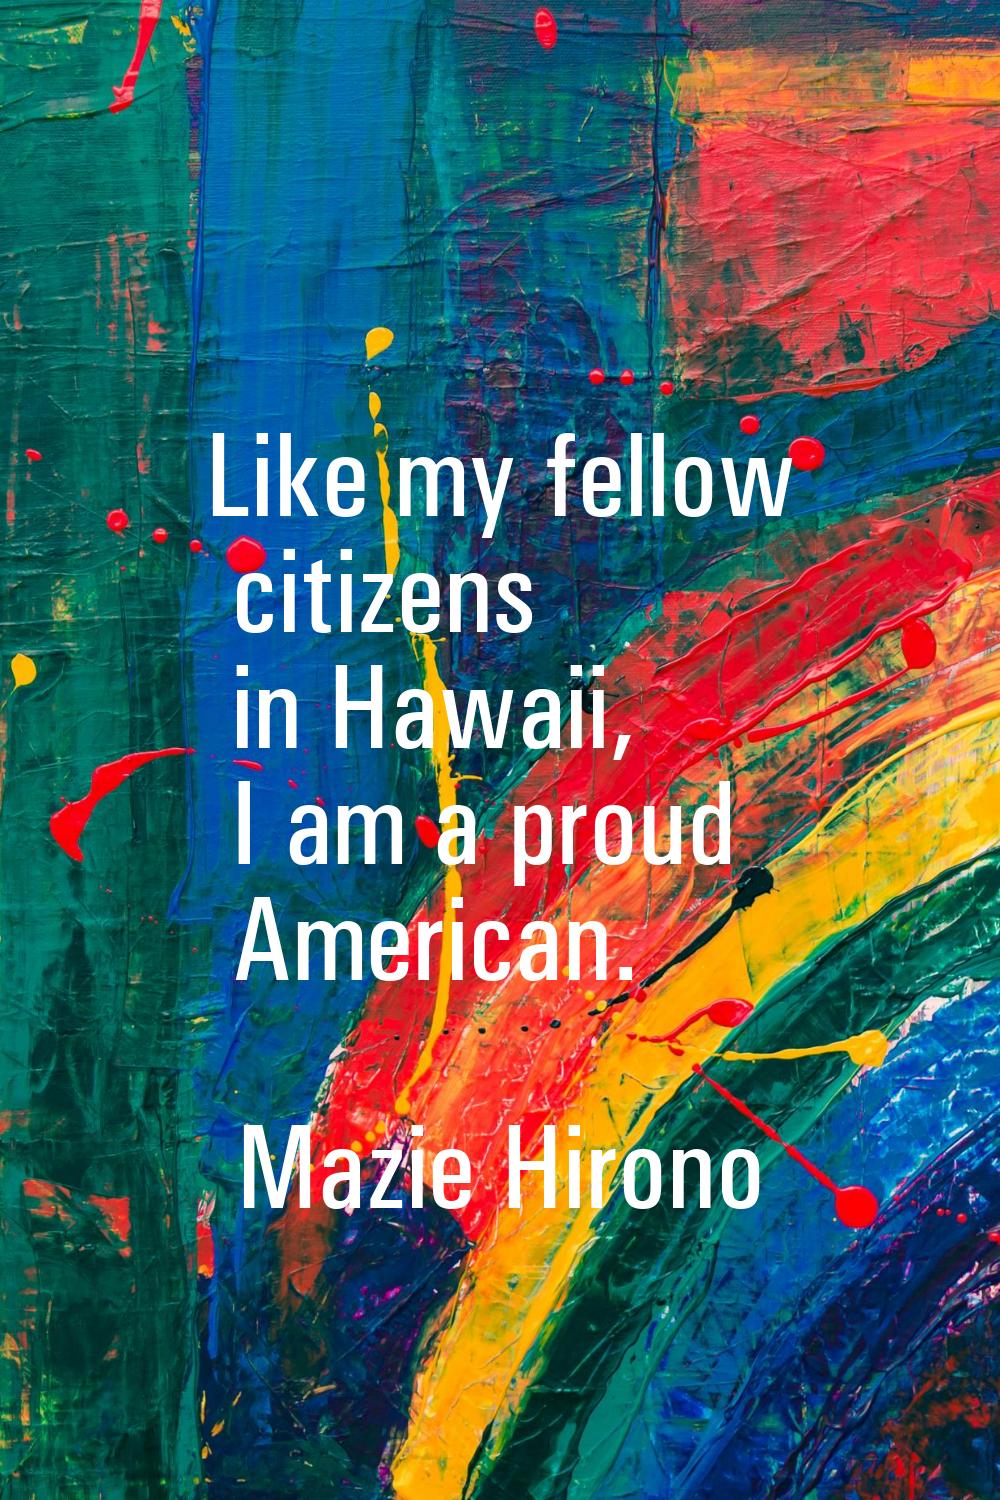 Like my fellow citizens in Hawaii, I am a proud American.